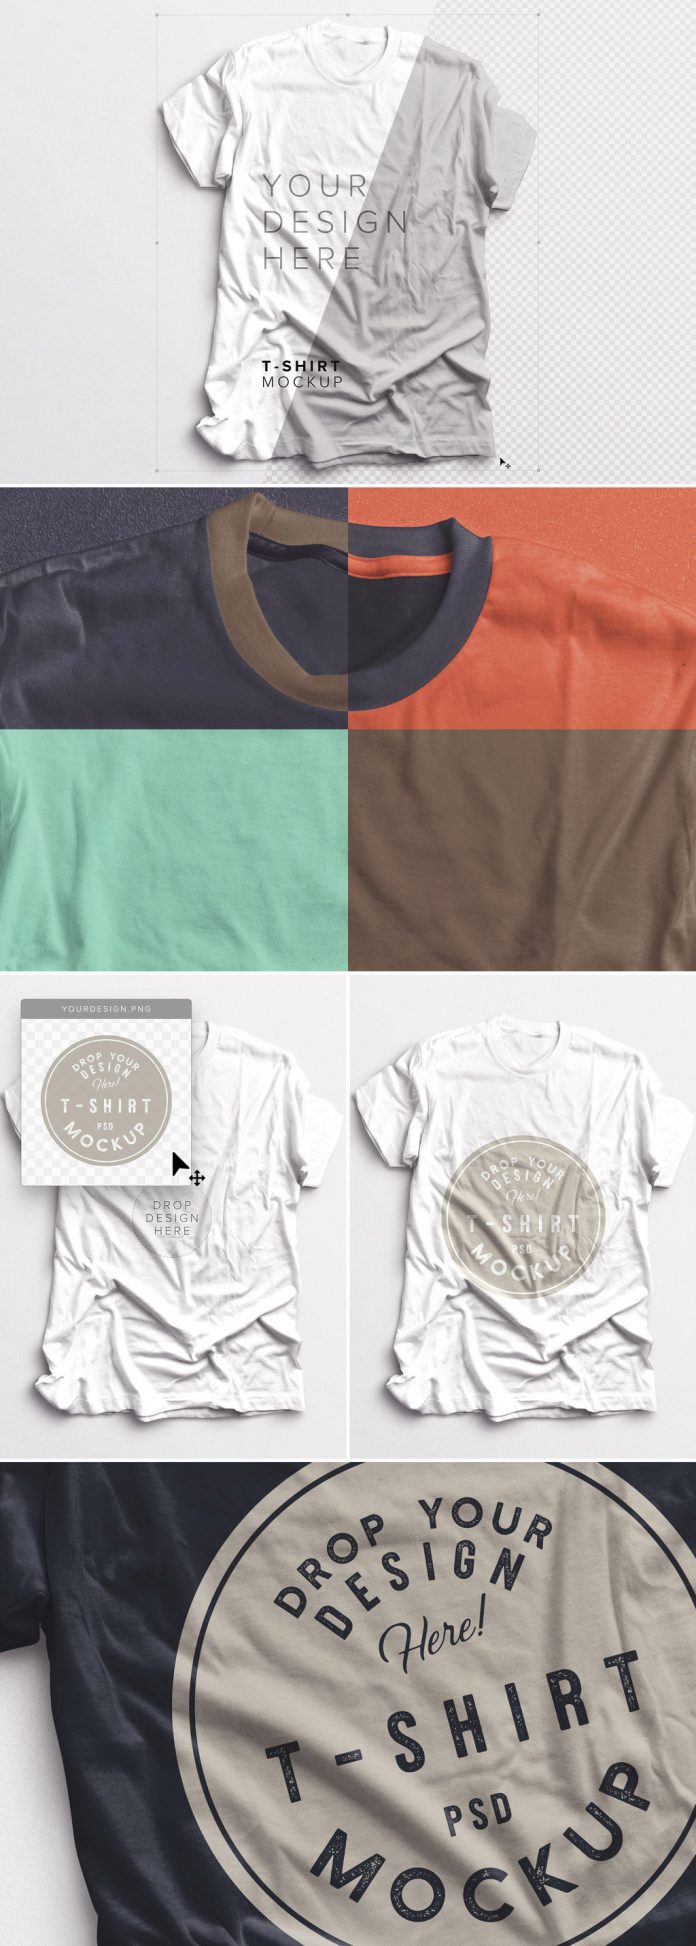 Download a customizable Adobe Photoshop t-shirt mockup with multiple layout options.